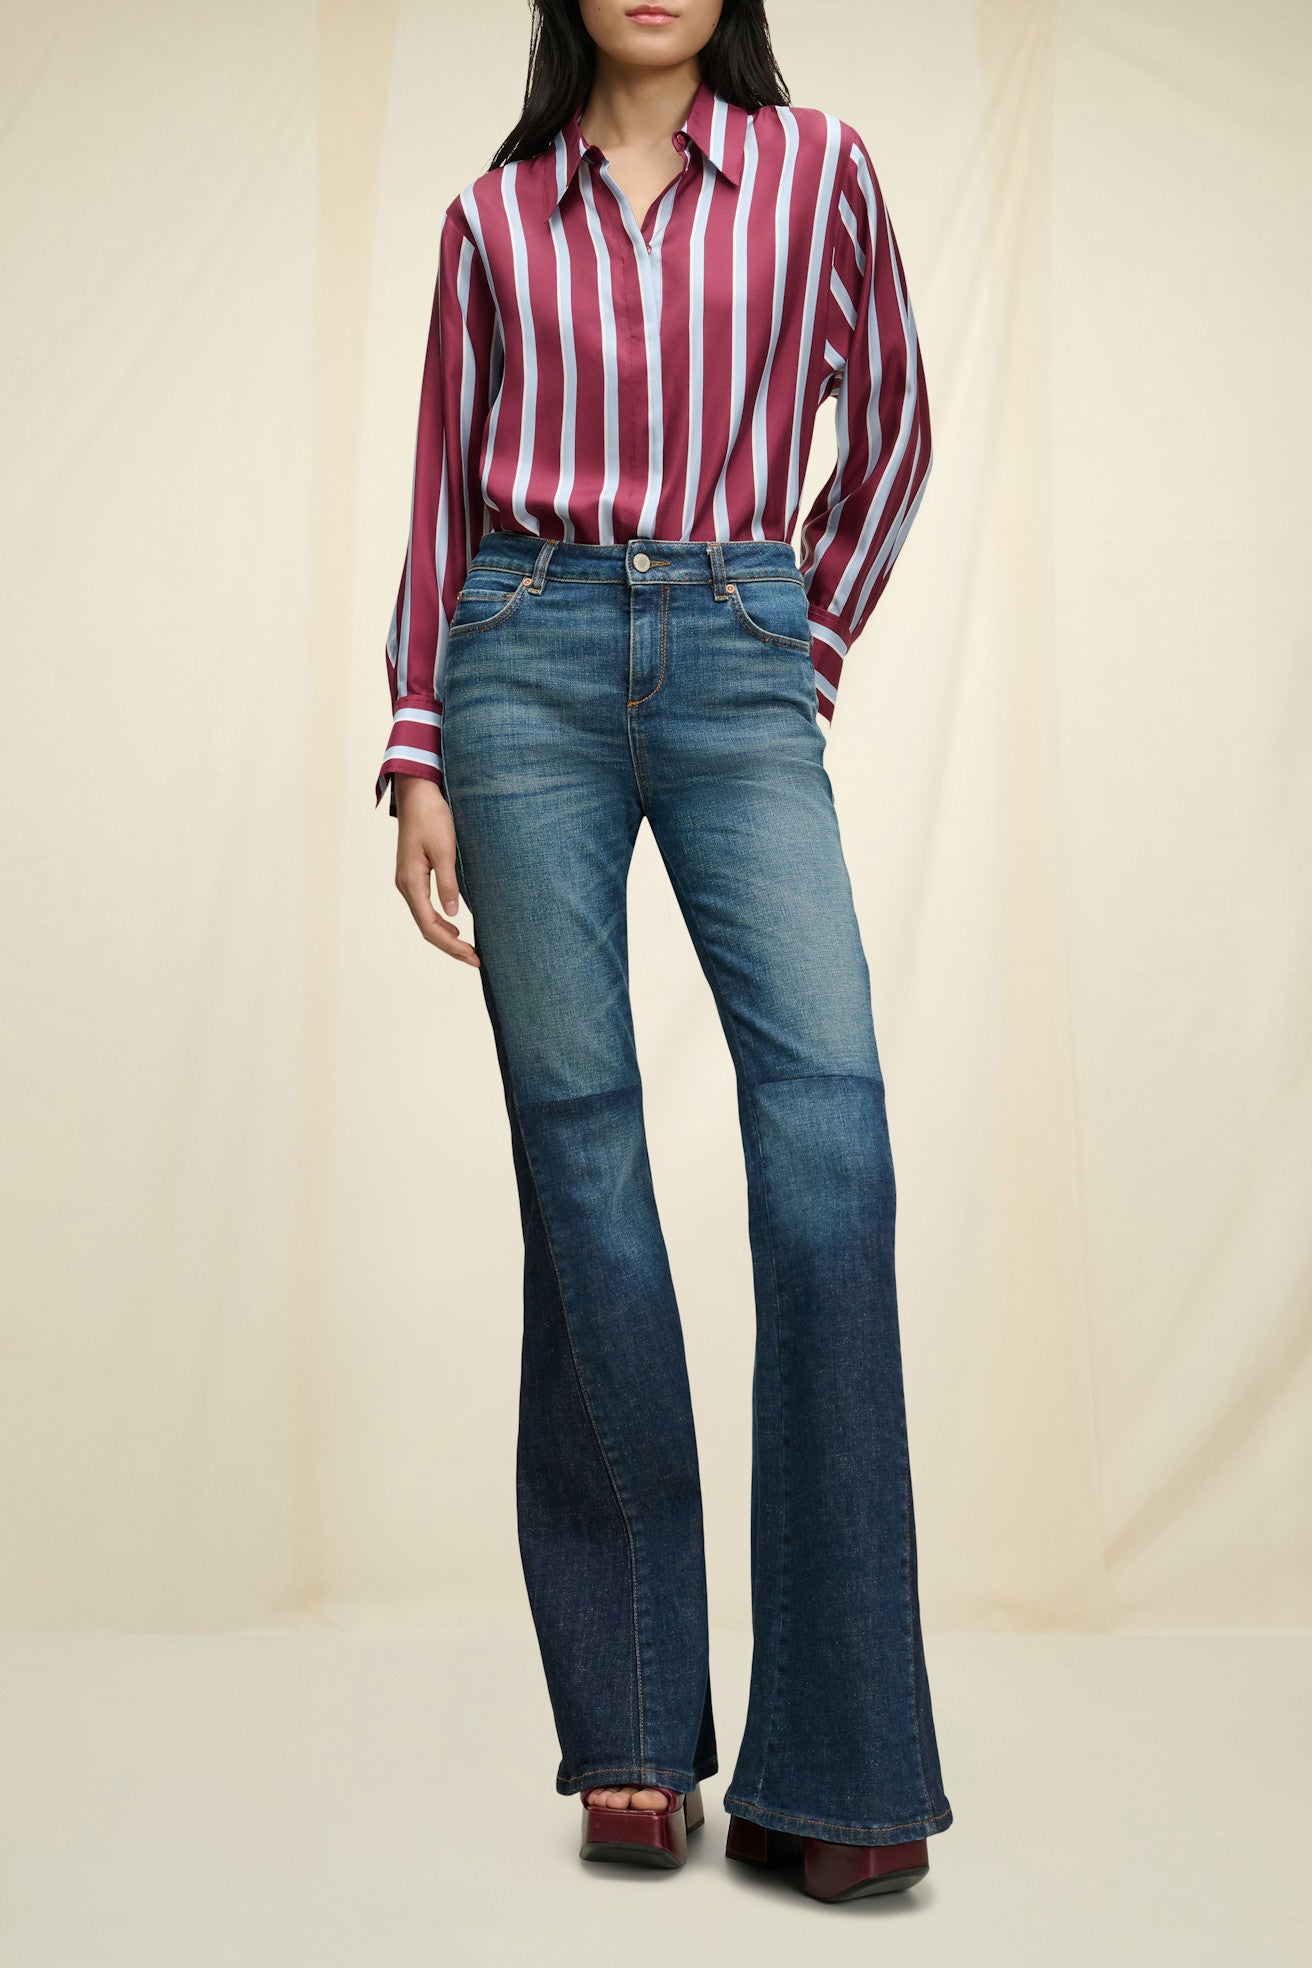 Luxurious stripes blouse by Dorothee Schumacher